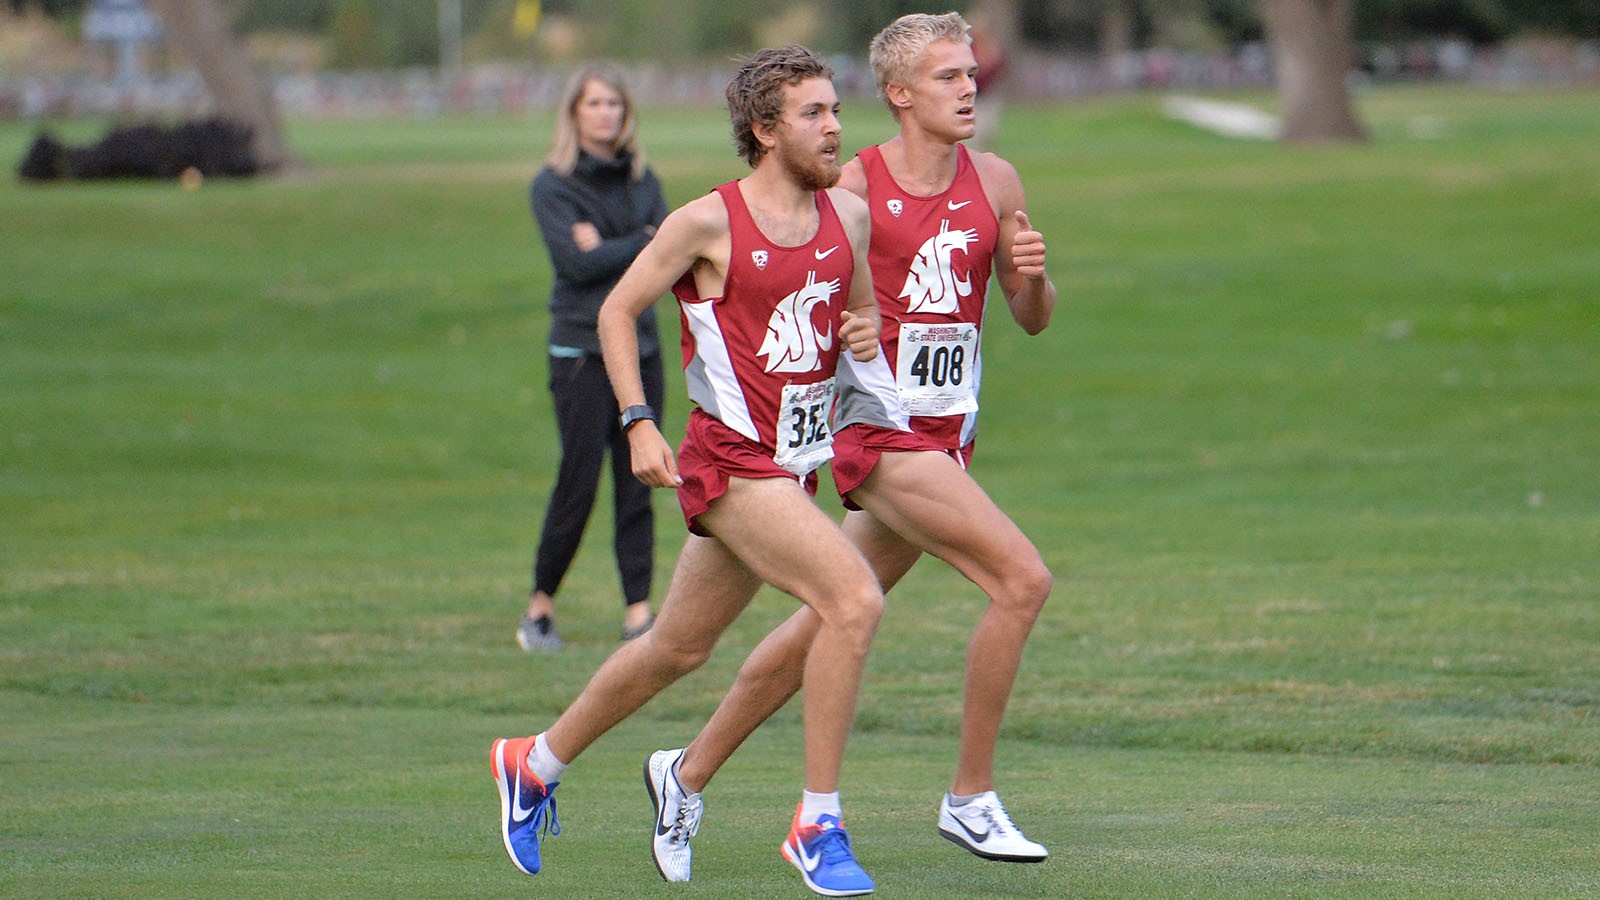 CROSS COUNTRY HEADED TO LOUISVILLE FOR NCAA CHAMPIONSHIPS